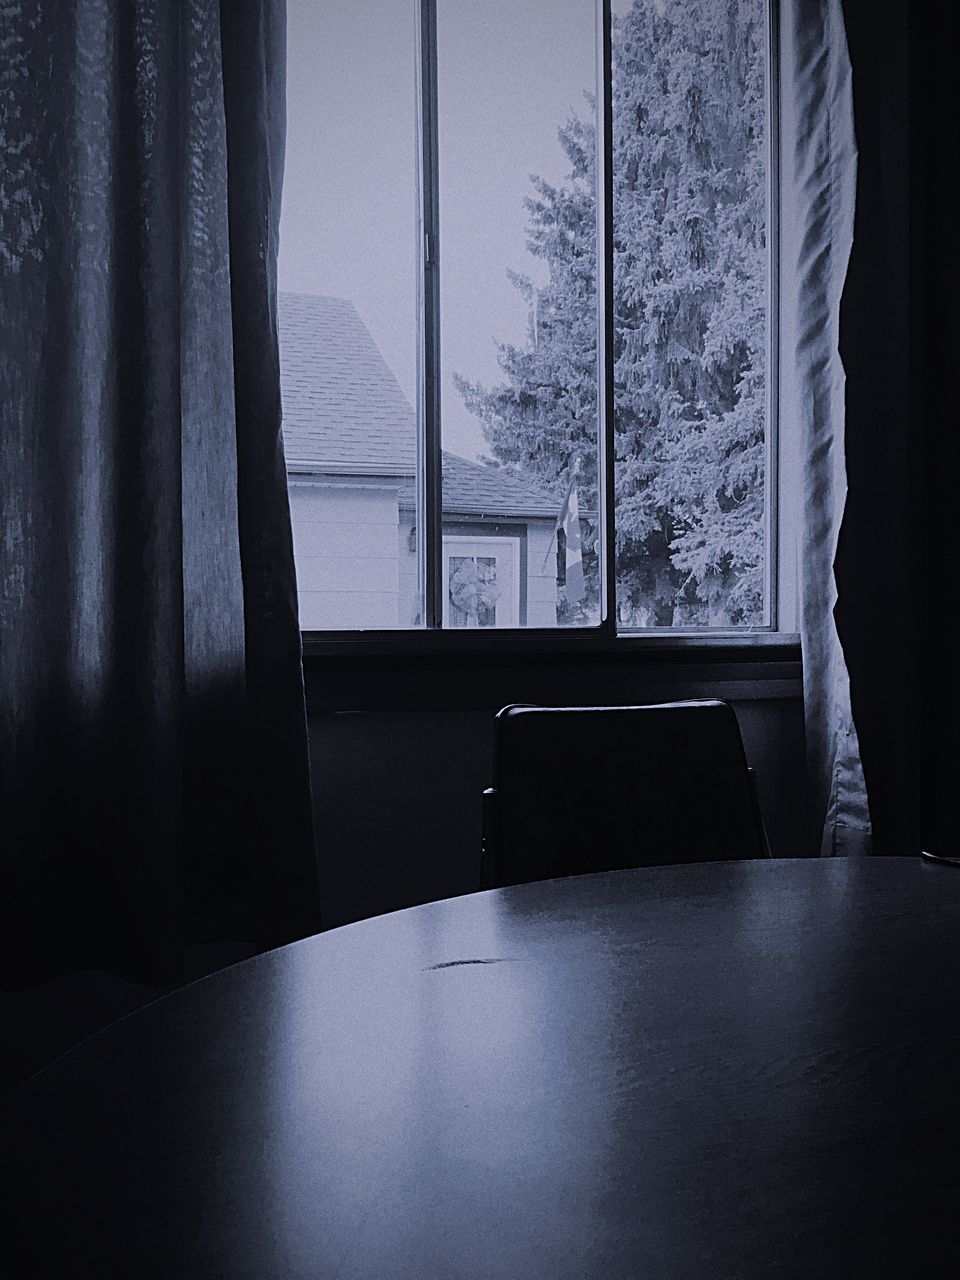 window, indoors, no people, cold temperature, winter, tree, curtain, day, snow, nature